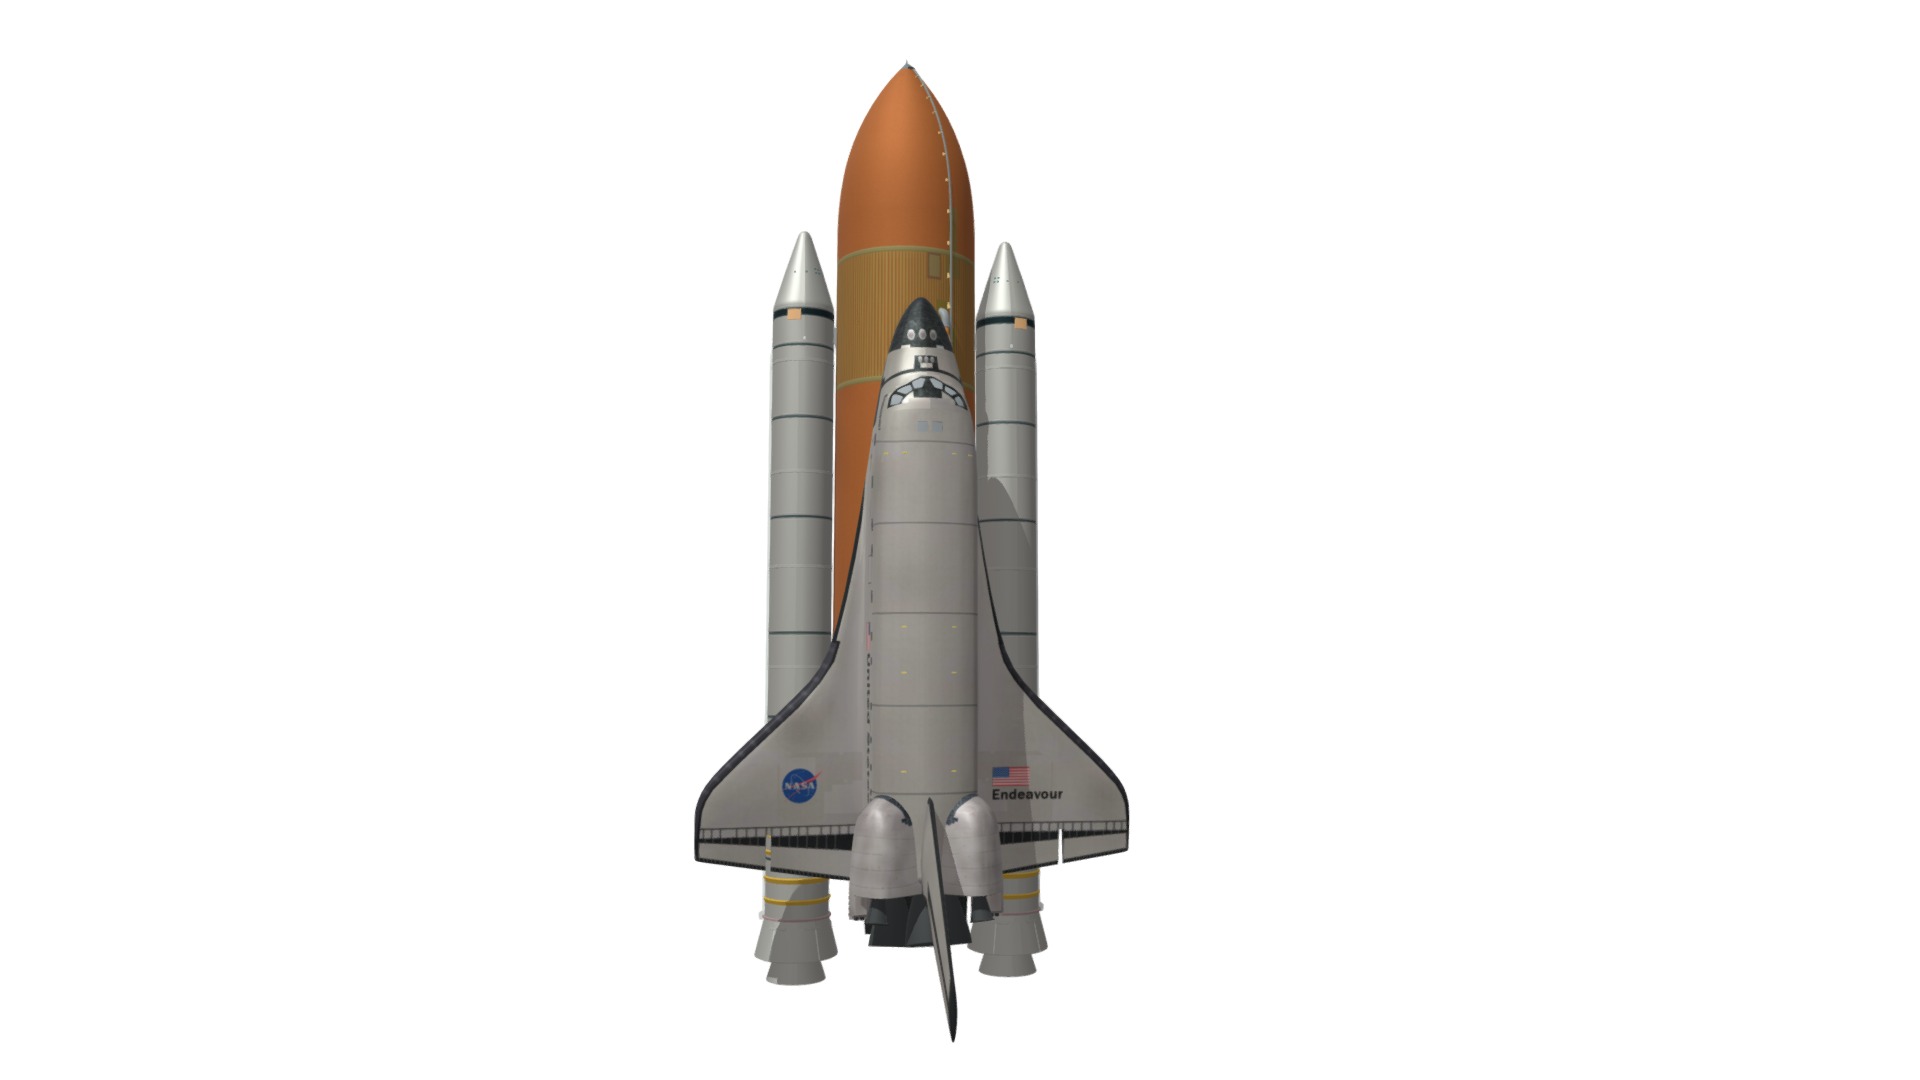 3D model Endeavour Space Shuttle - This is a 3D model of the Endeavour Space Shuttle. The 3D model is about a space shuttle with a white background.